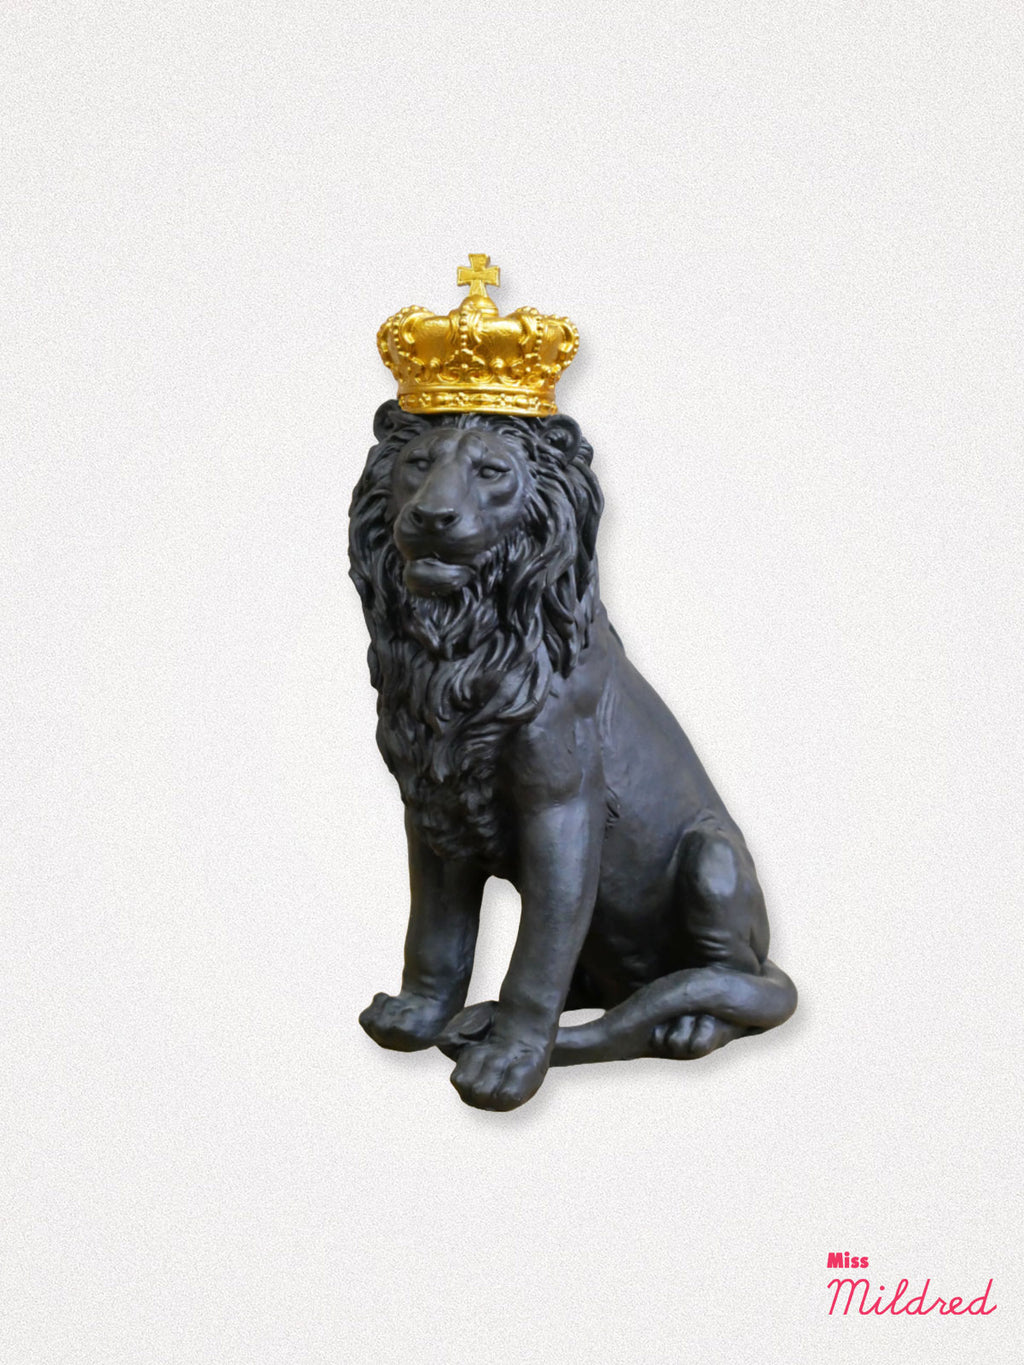 Sitting Black Lion with Gold Crown